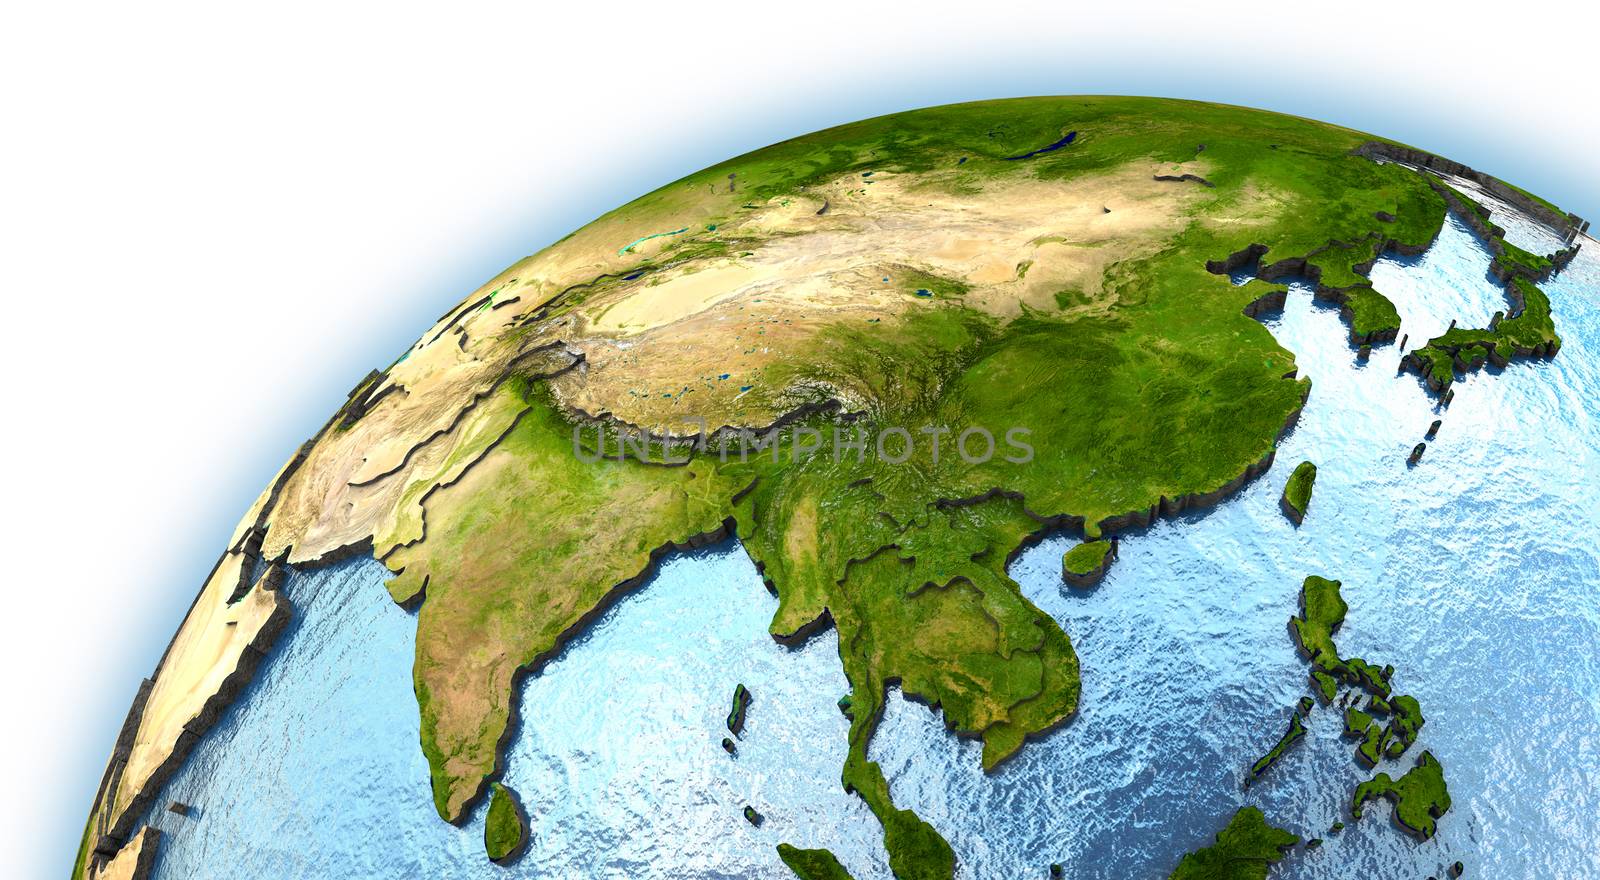 southeast Asia on planet Earth with embossed continents and country borders. Elements of this image furnished by NASA.